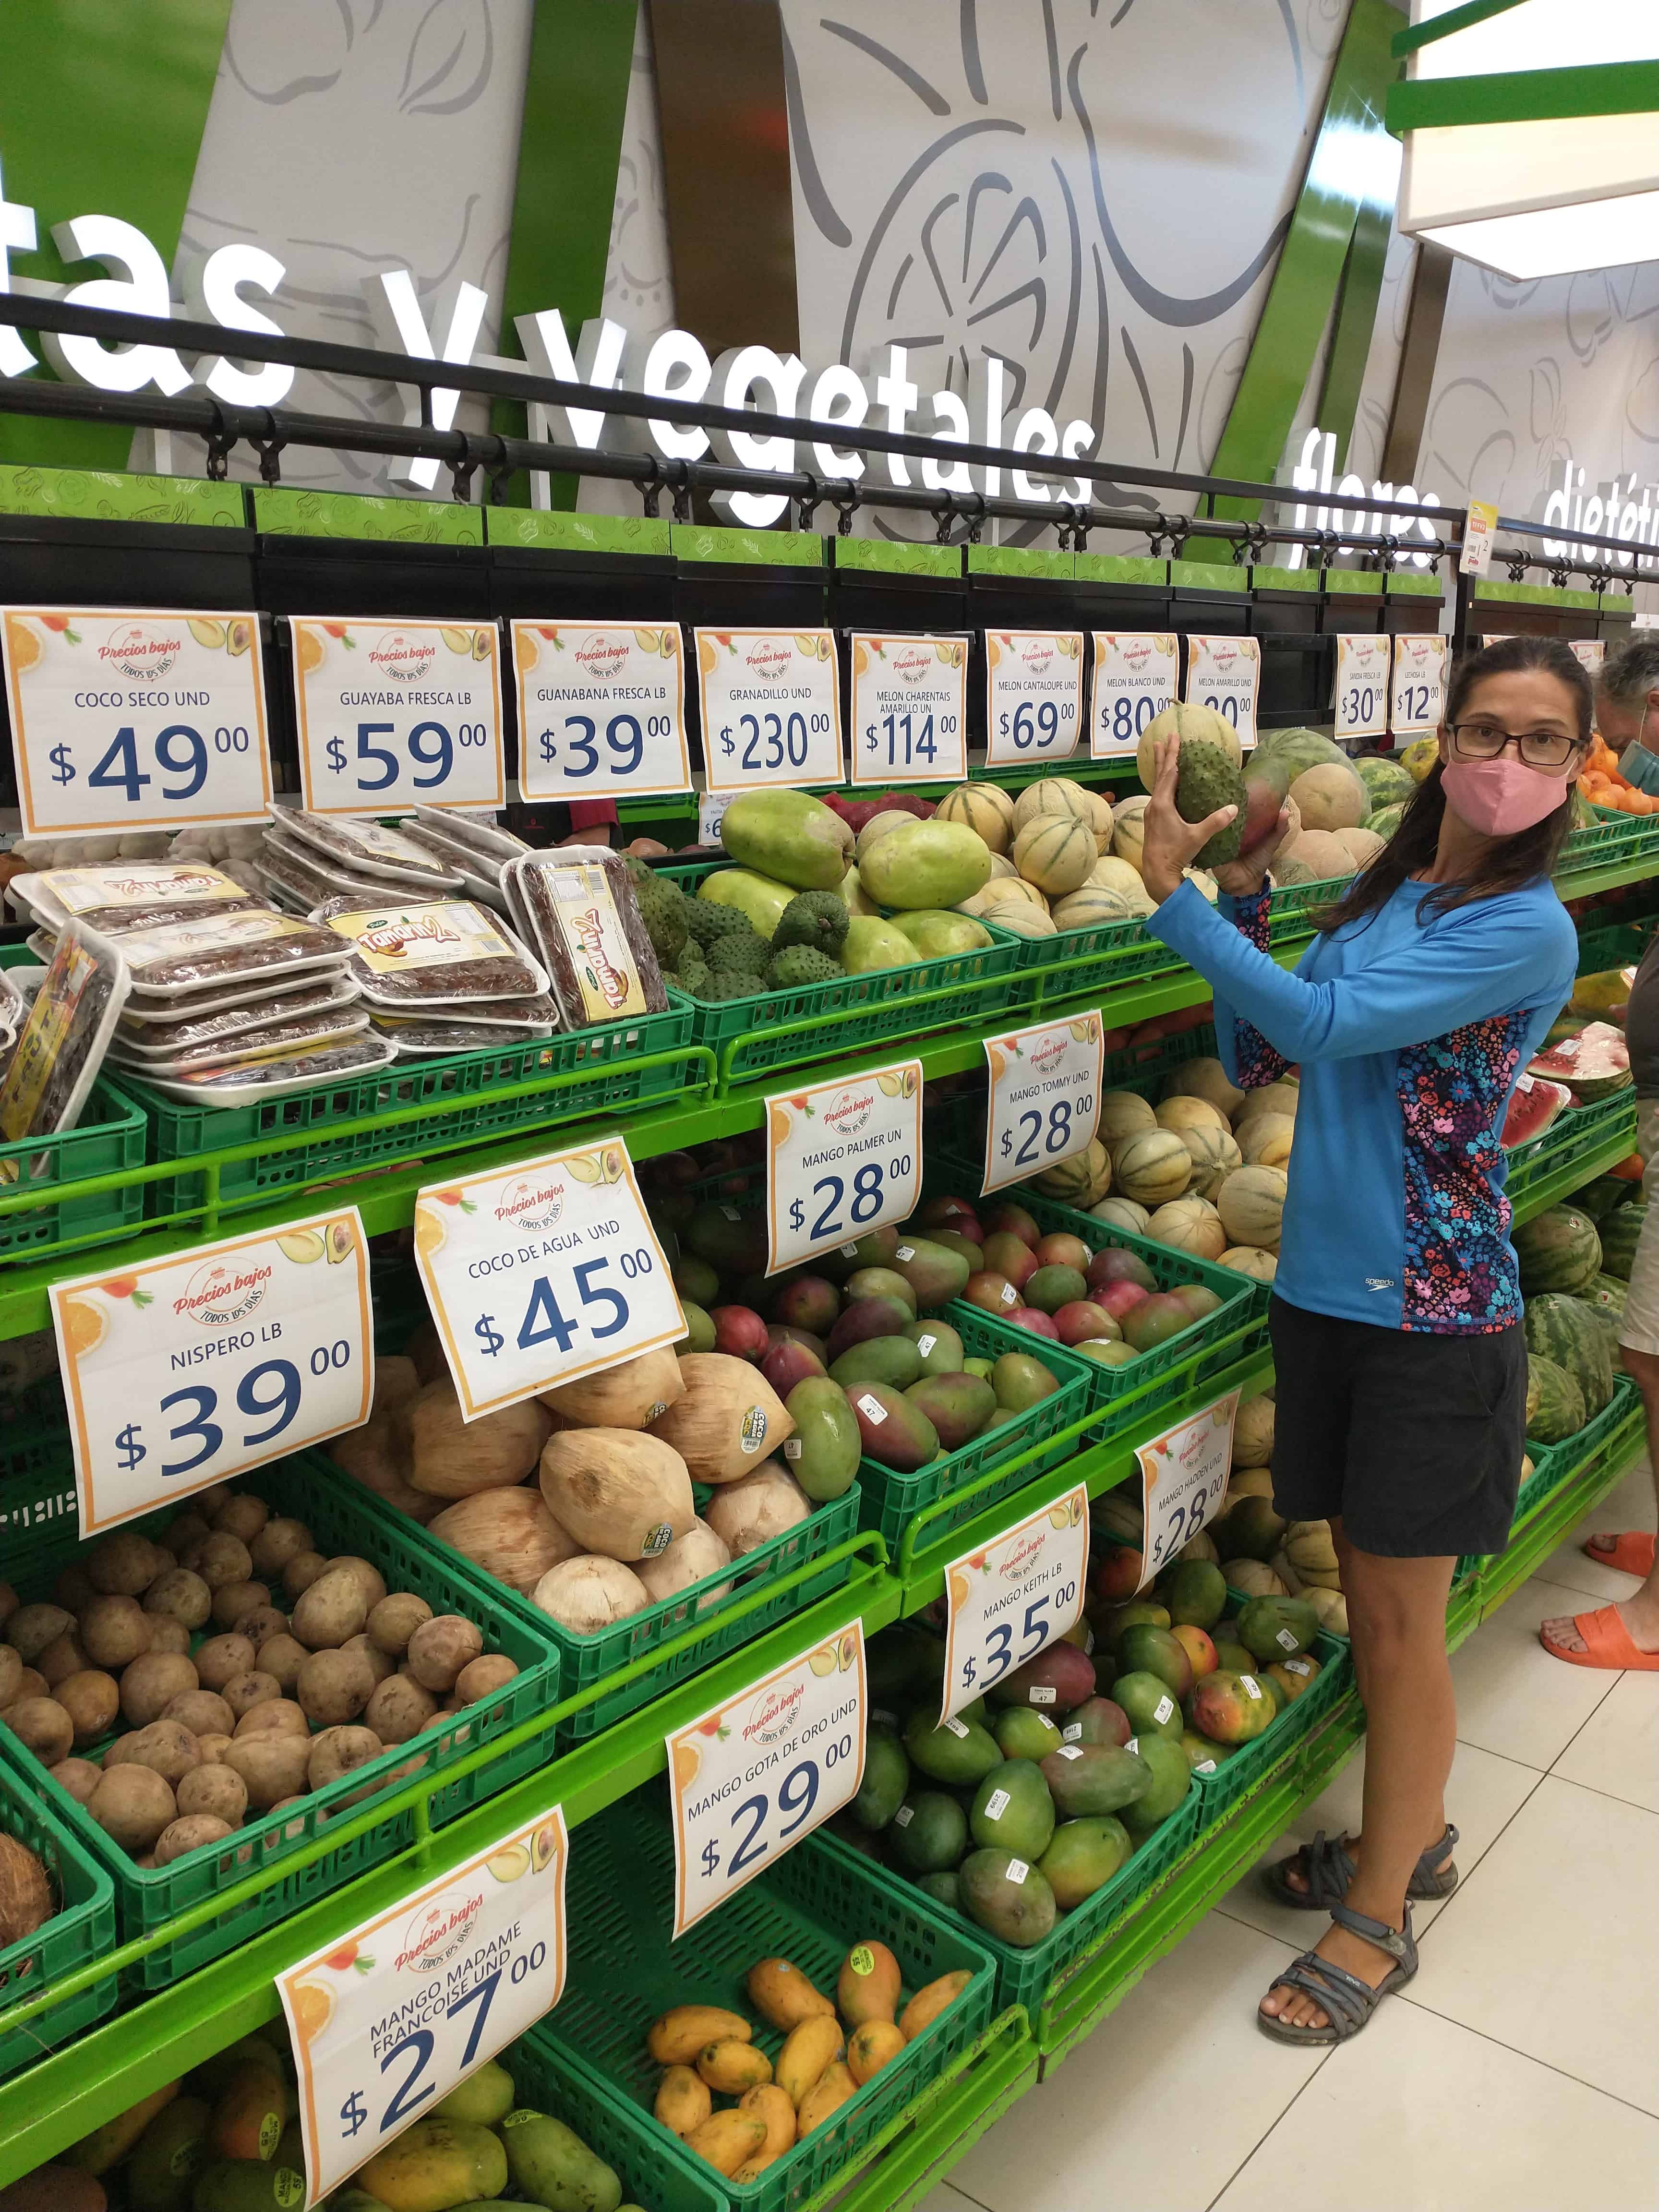 a produce section at a grocery store in the dominican republic, showing prices